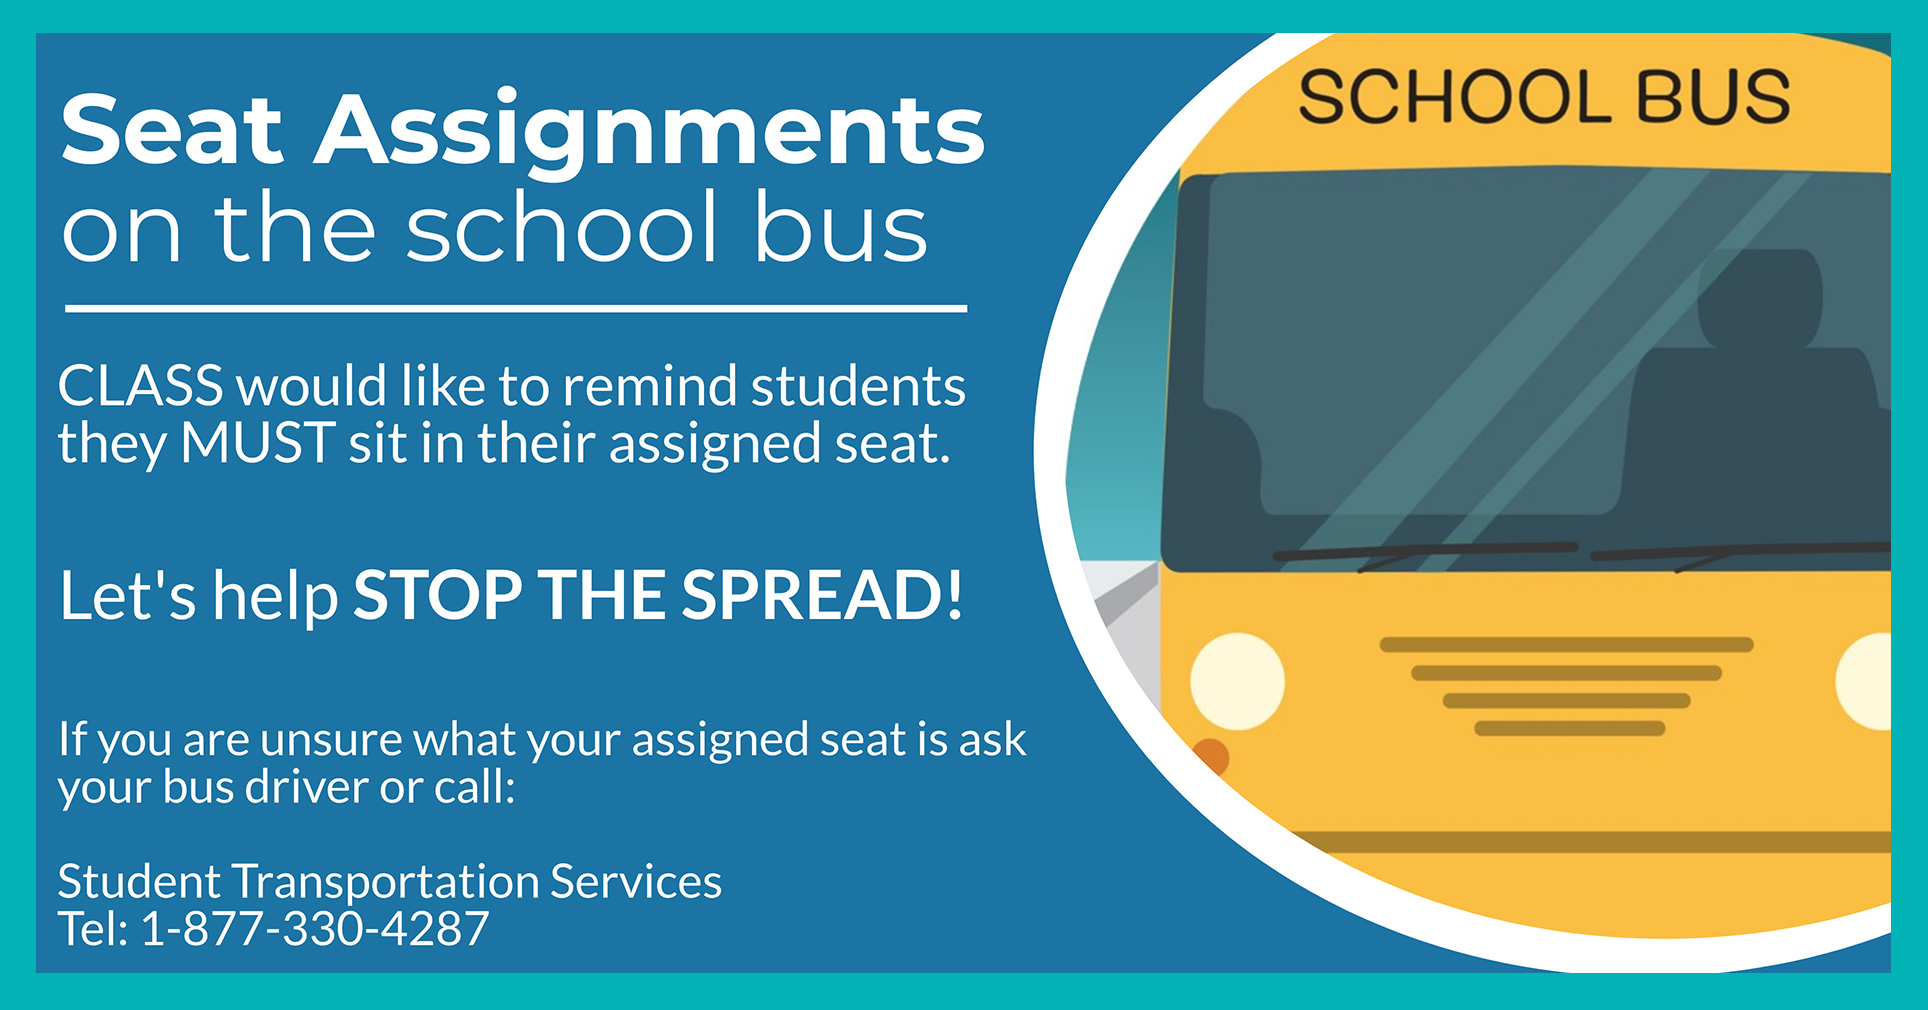 Reminder: Seat Assignments on the School Bus